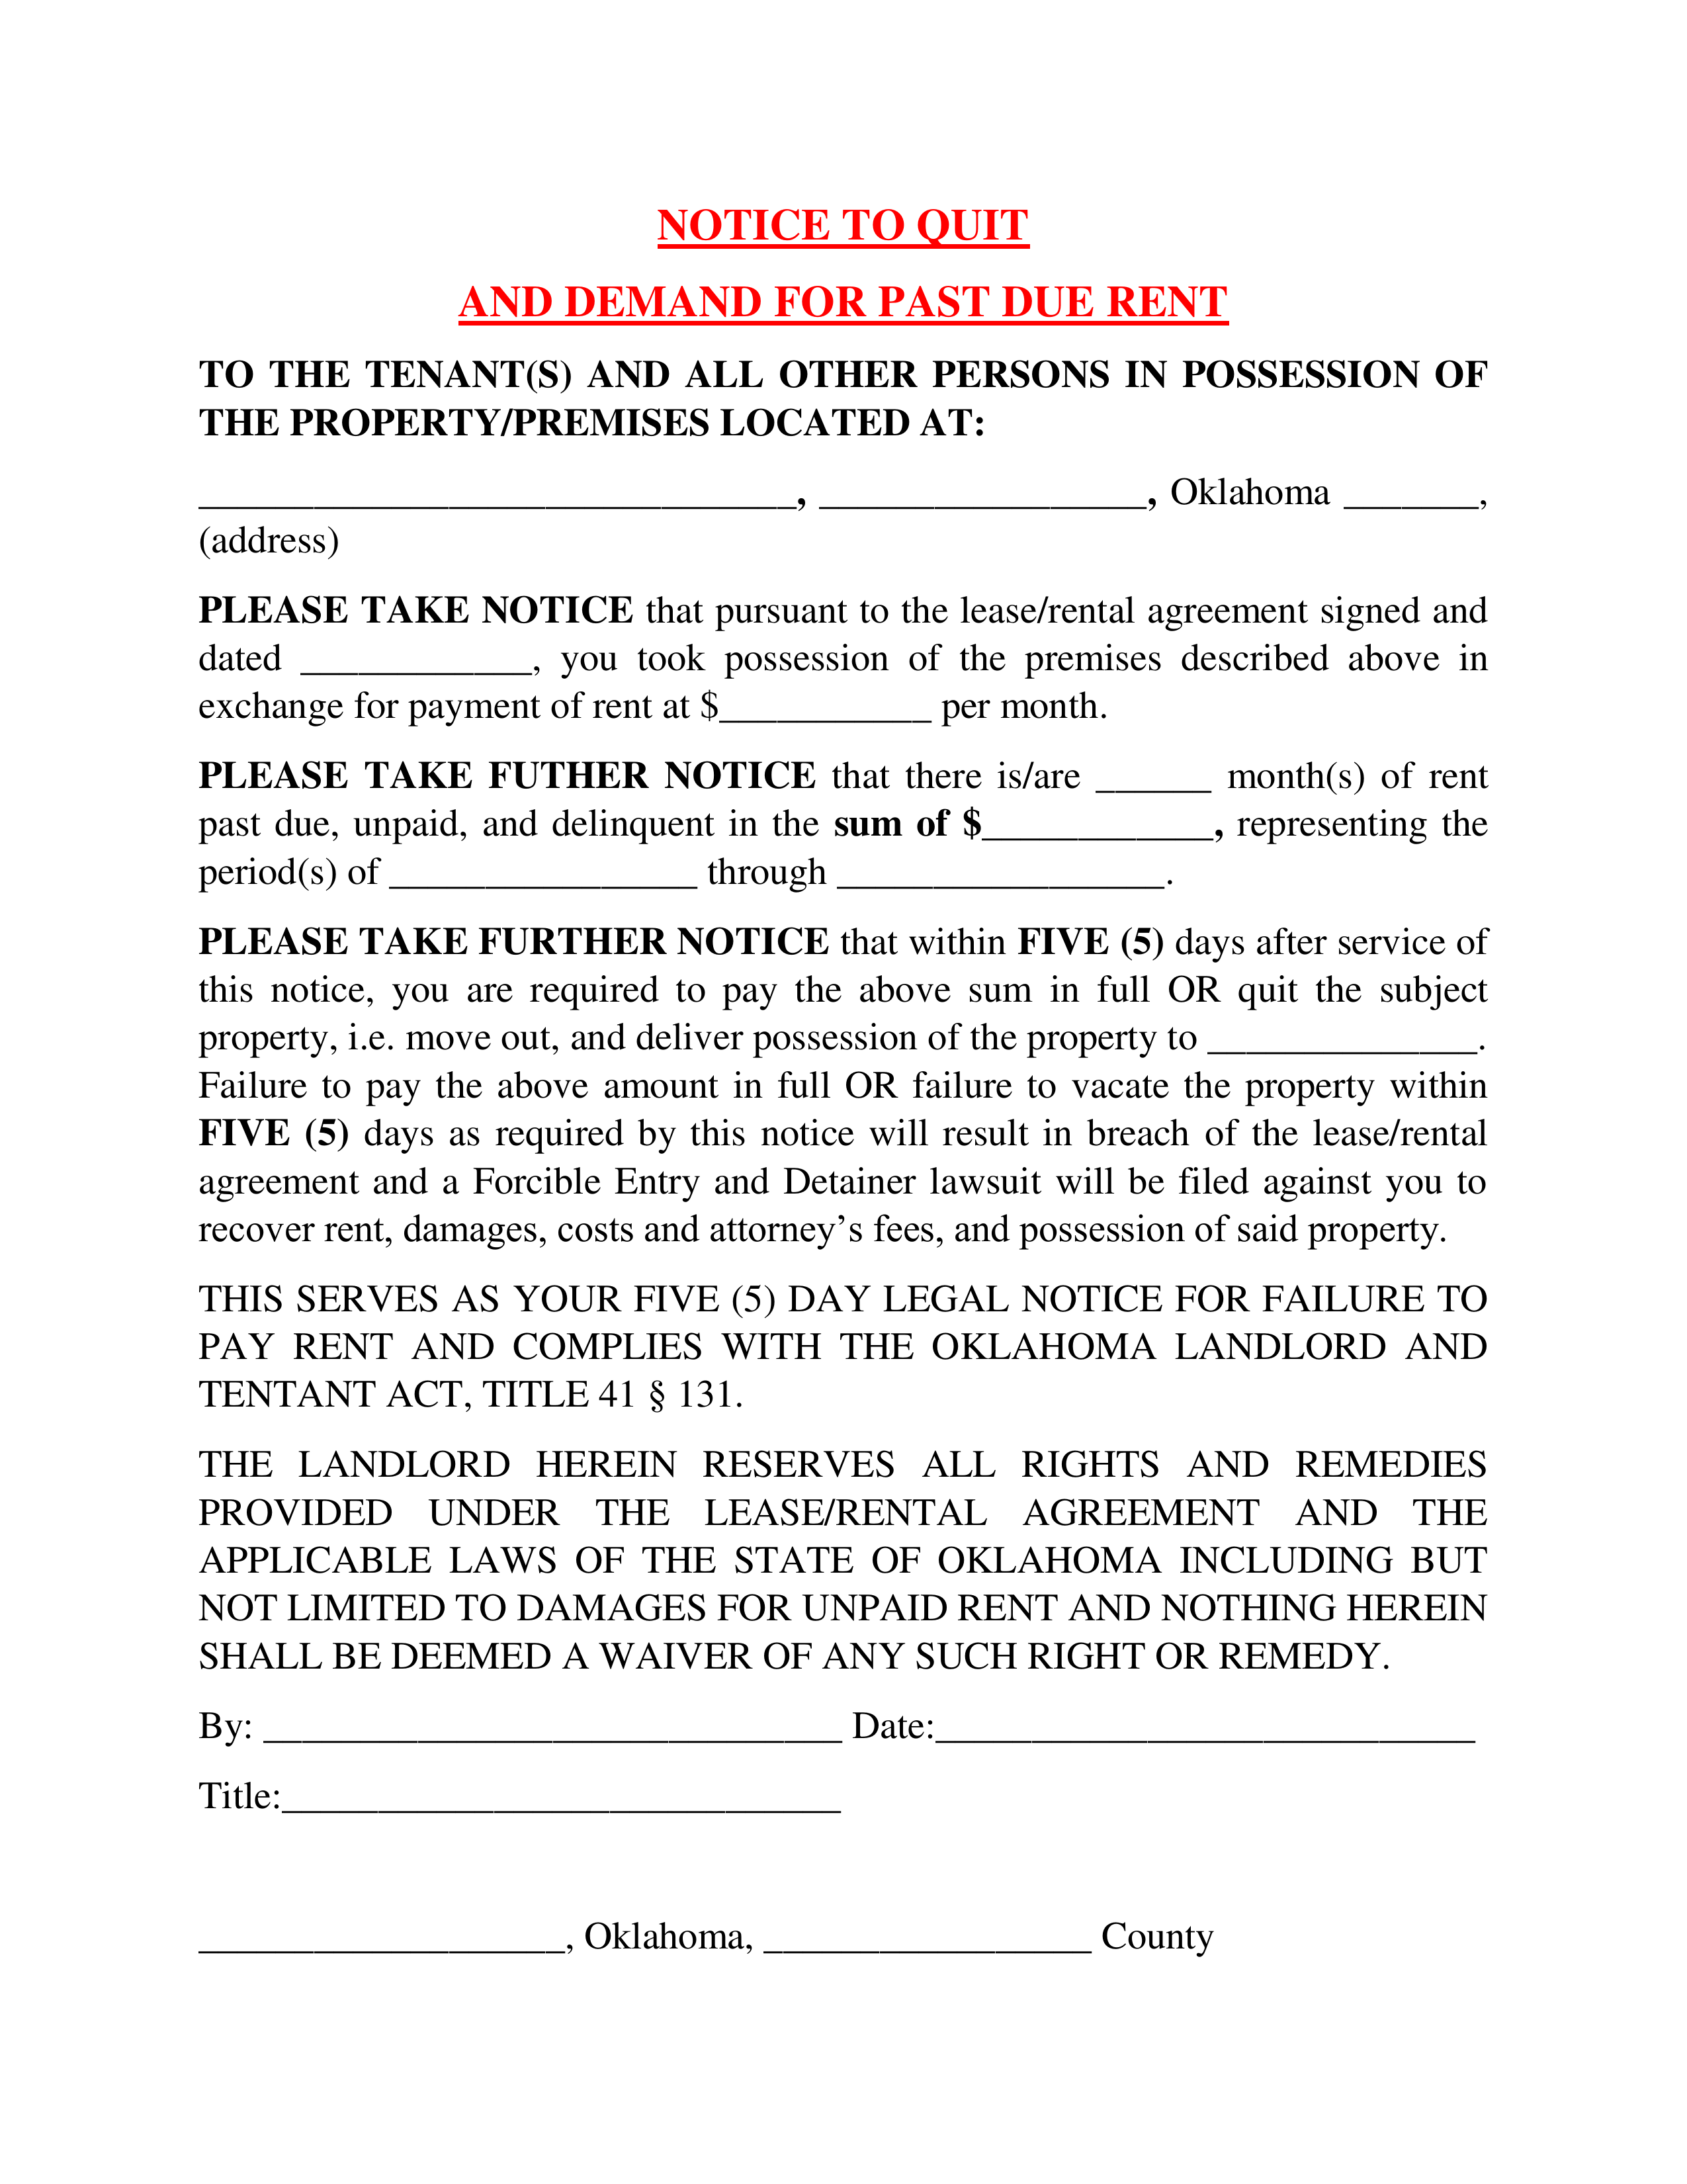 Oklahoma 5-Day Notice to Quit Form | Non-Payment of Rent